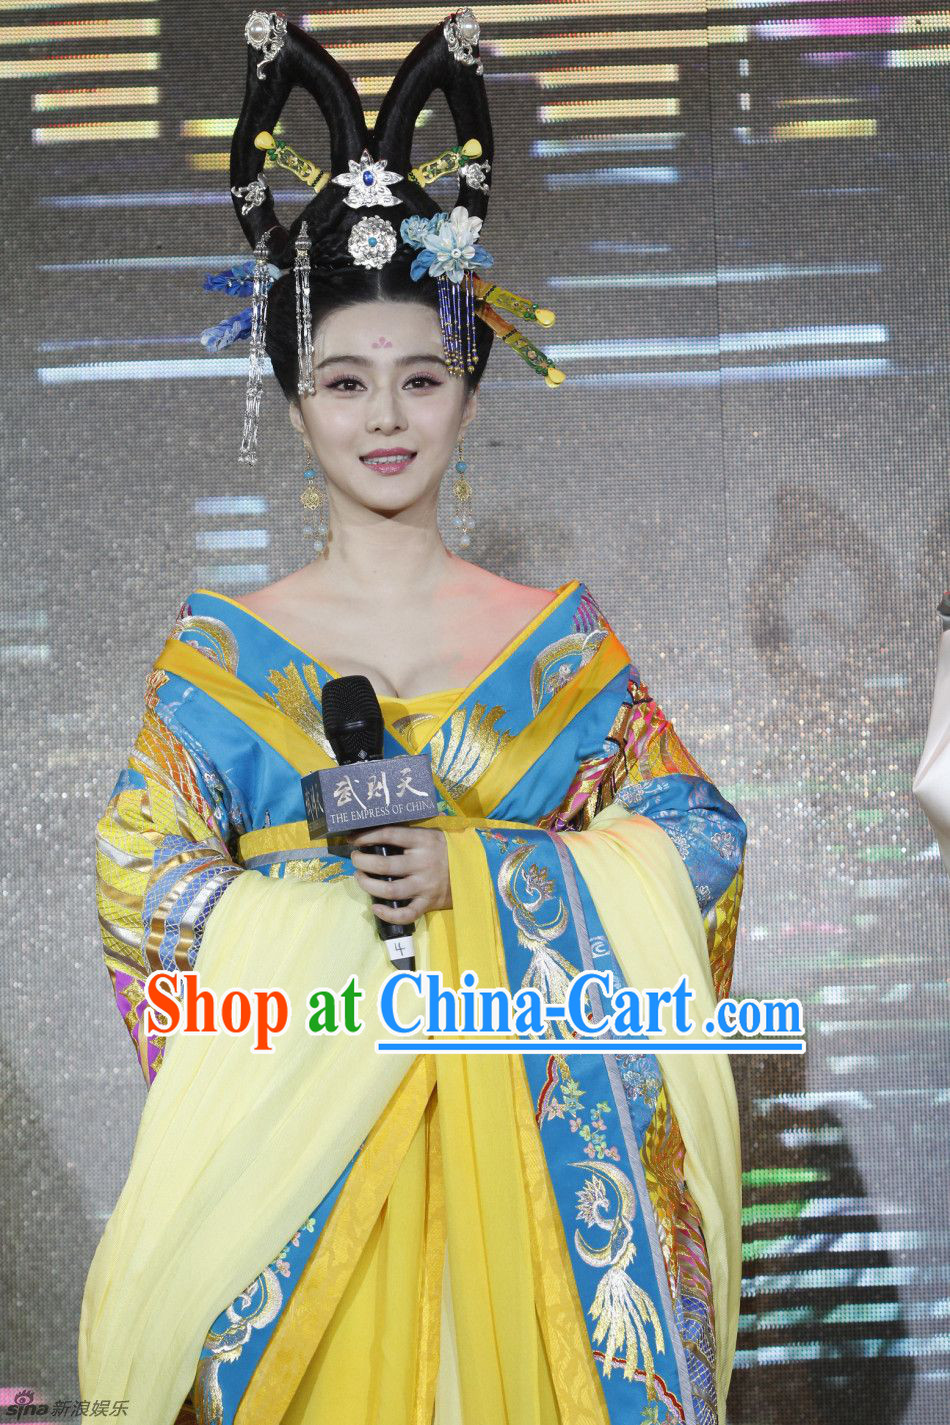 china clothes online